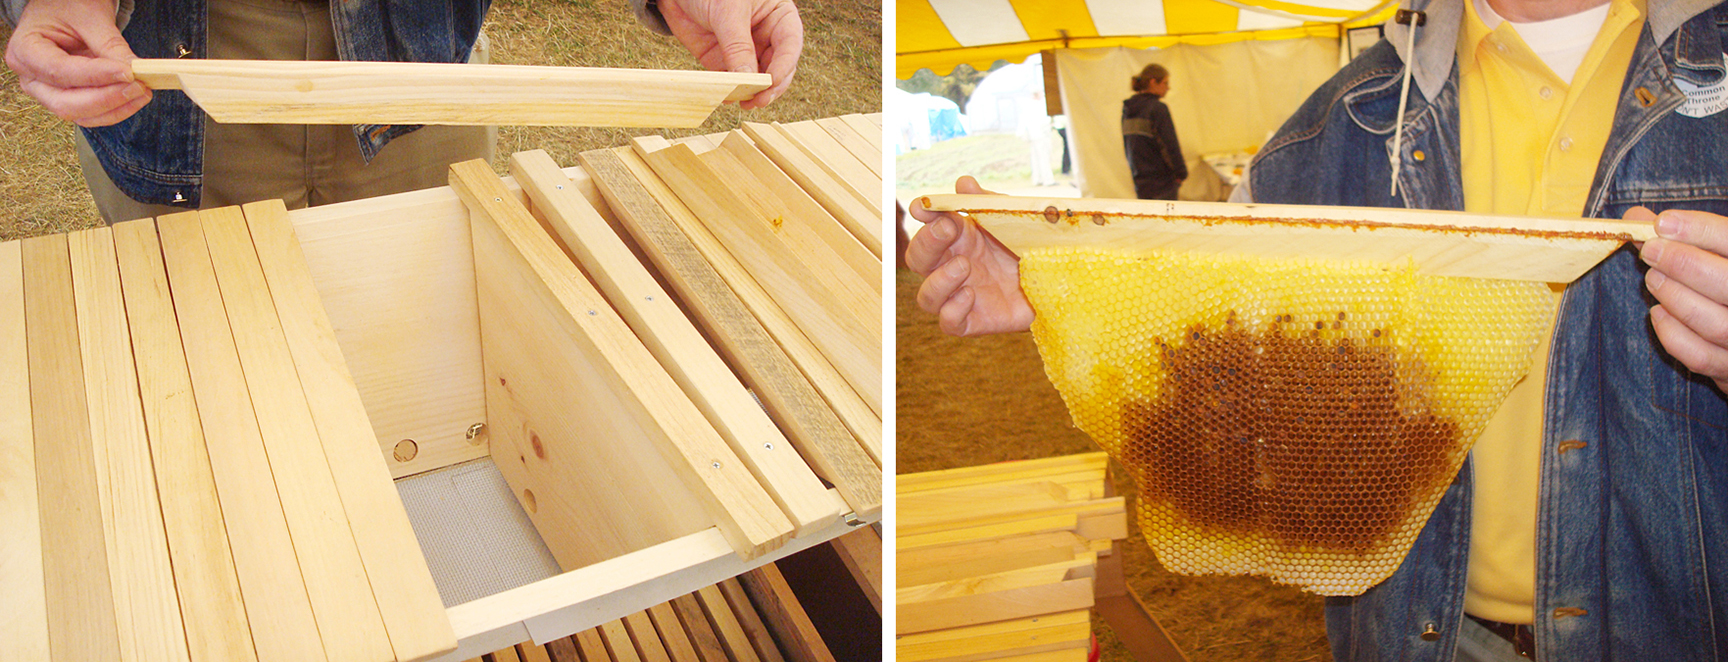 Top bar and honey comb from a Top Bar hive